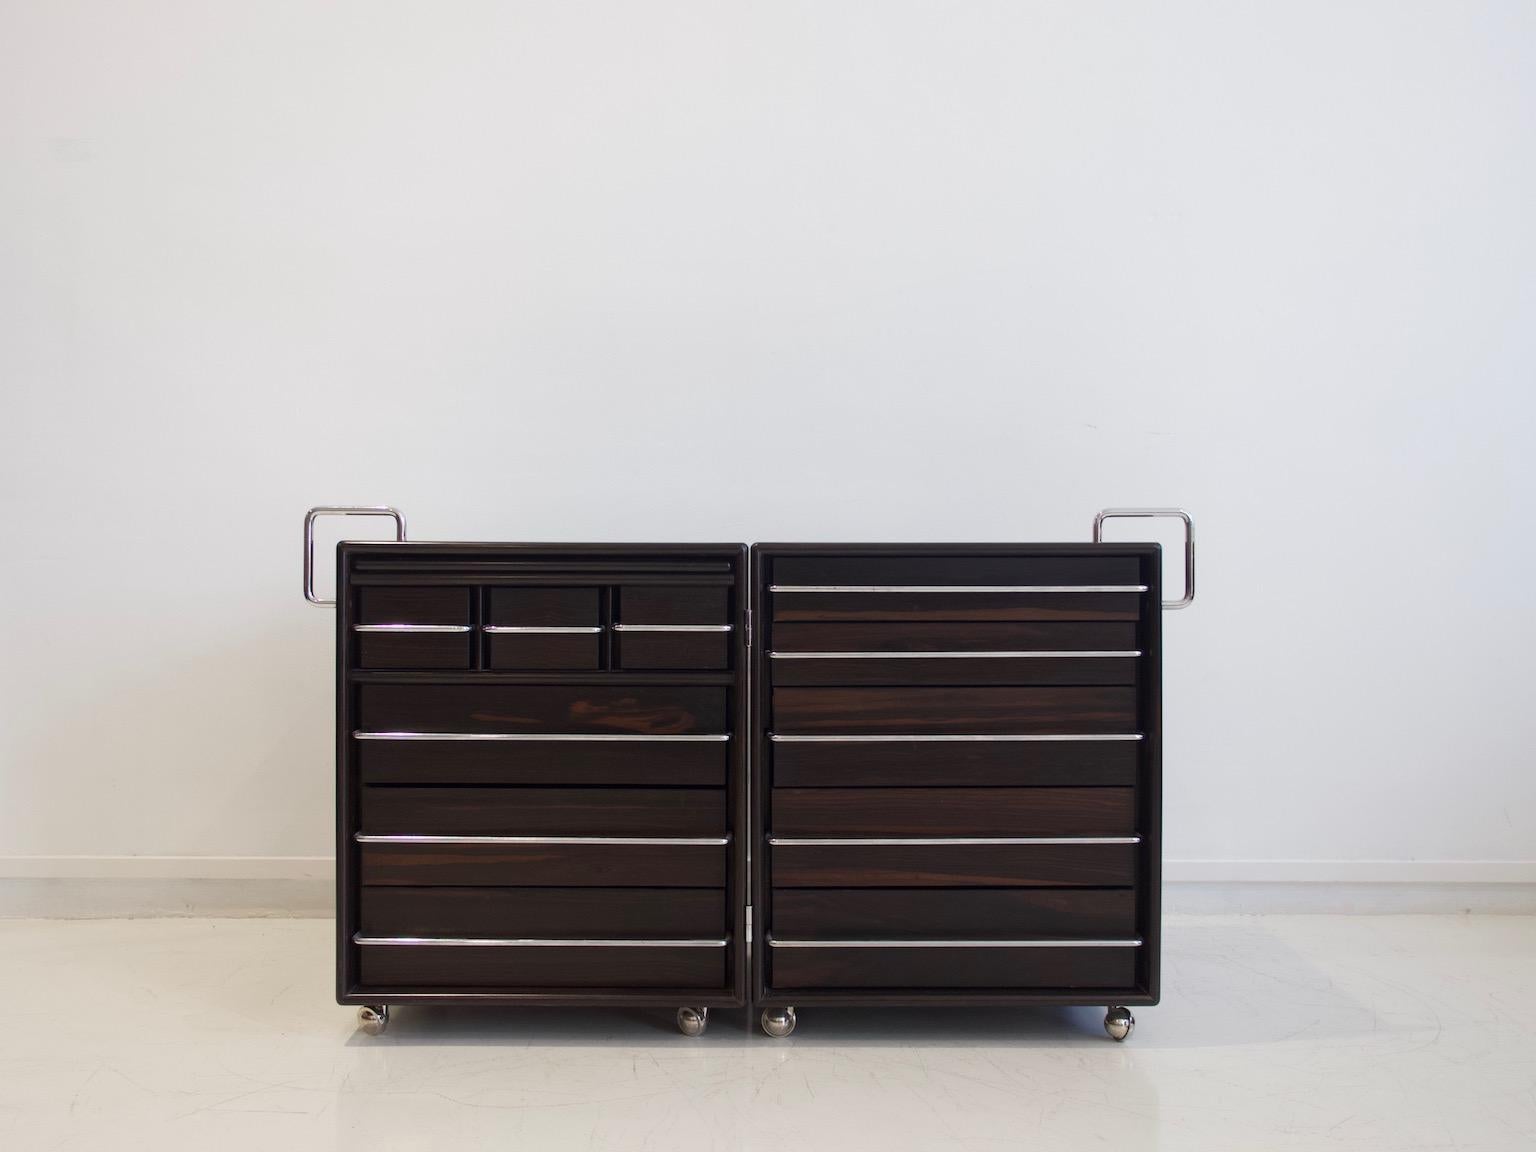 Chest of drawers/dressing table made of two adjustable compartments hinged together, which can be opened and closed as demonstrated on the photos. Made of solid wood and veneered plywood in some parts, handles in chromed steel. Produced by Bernini